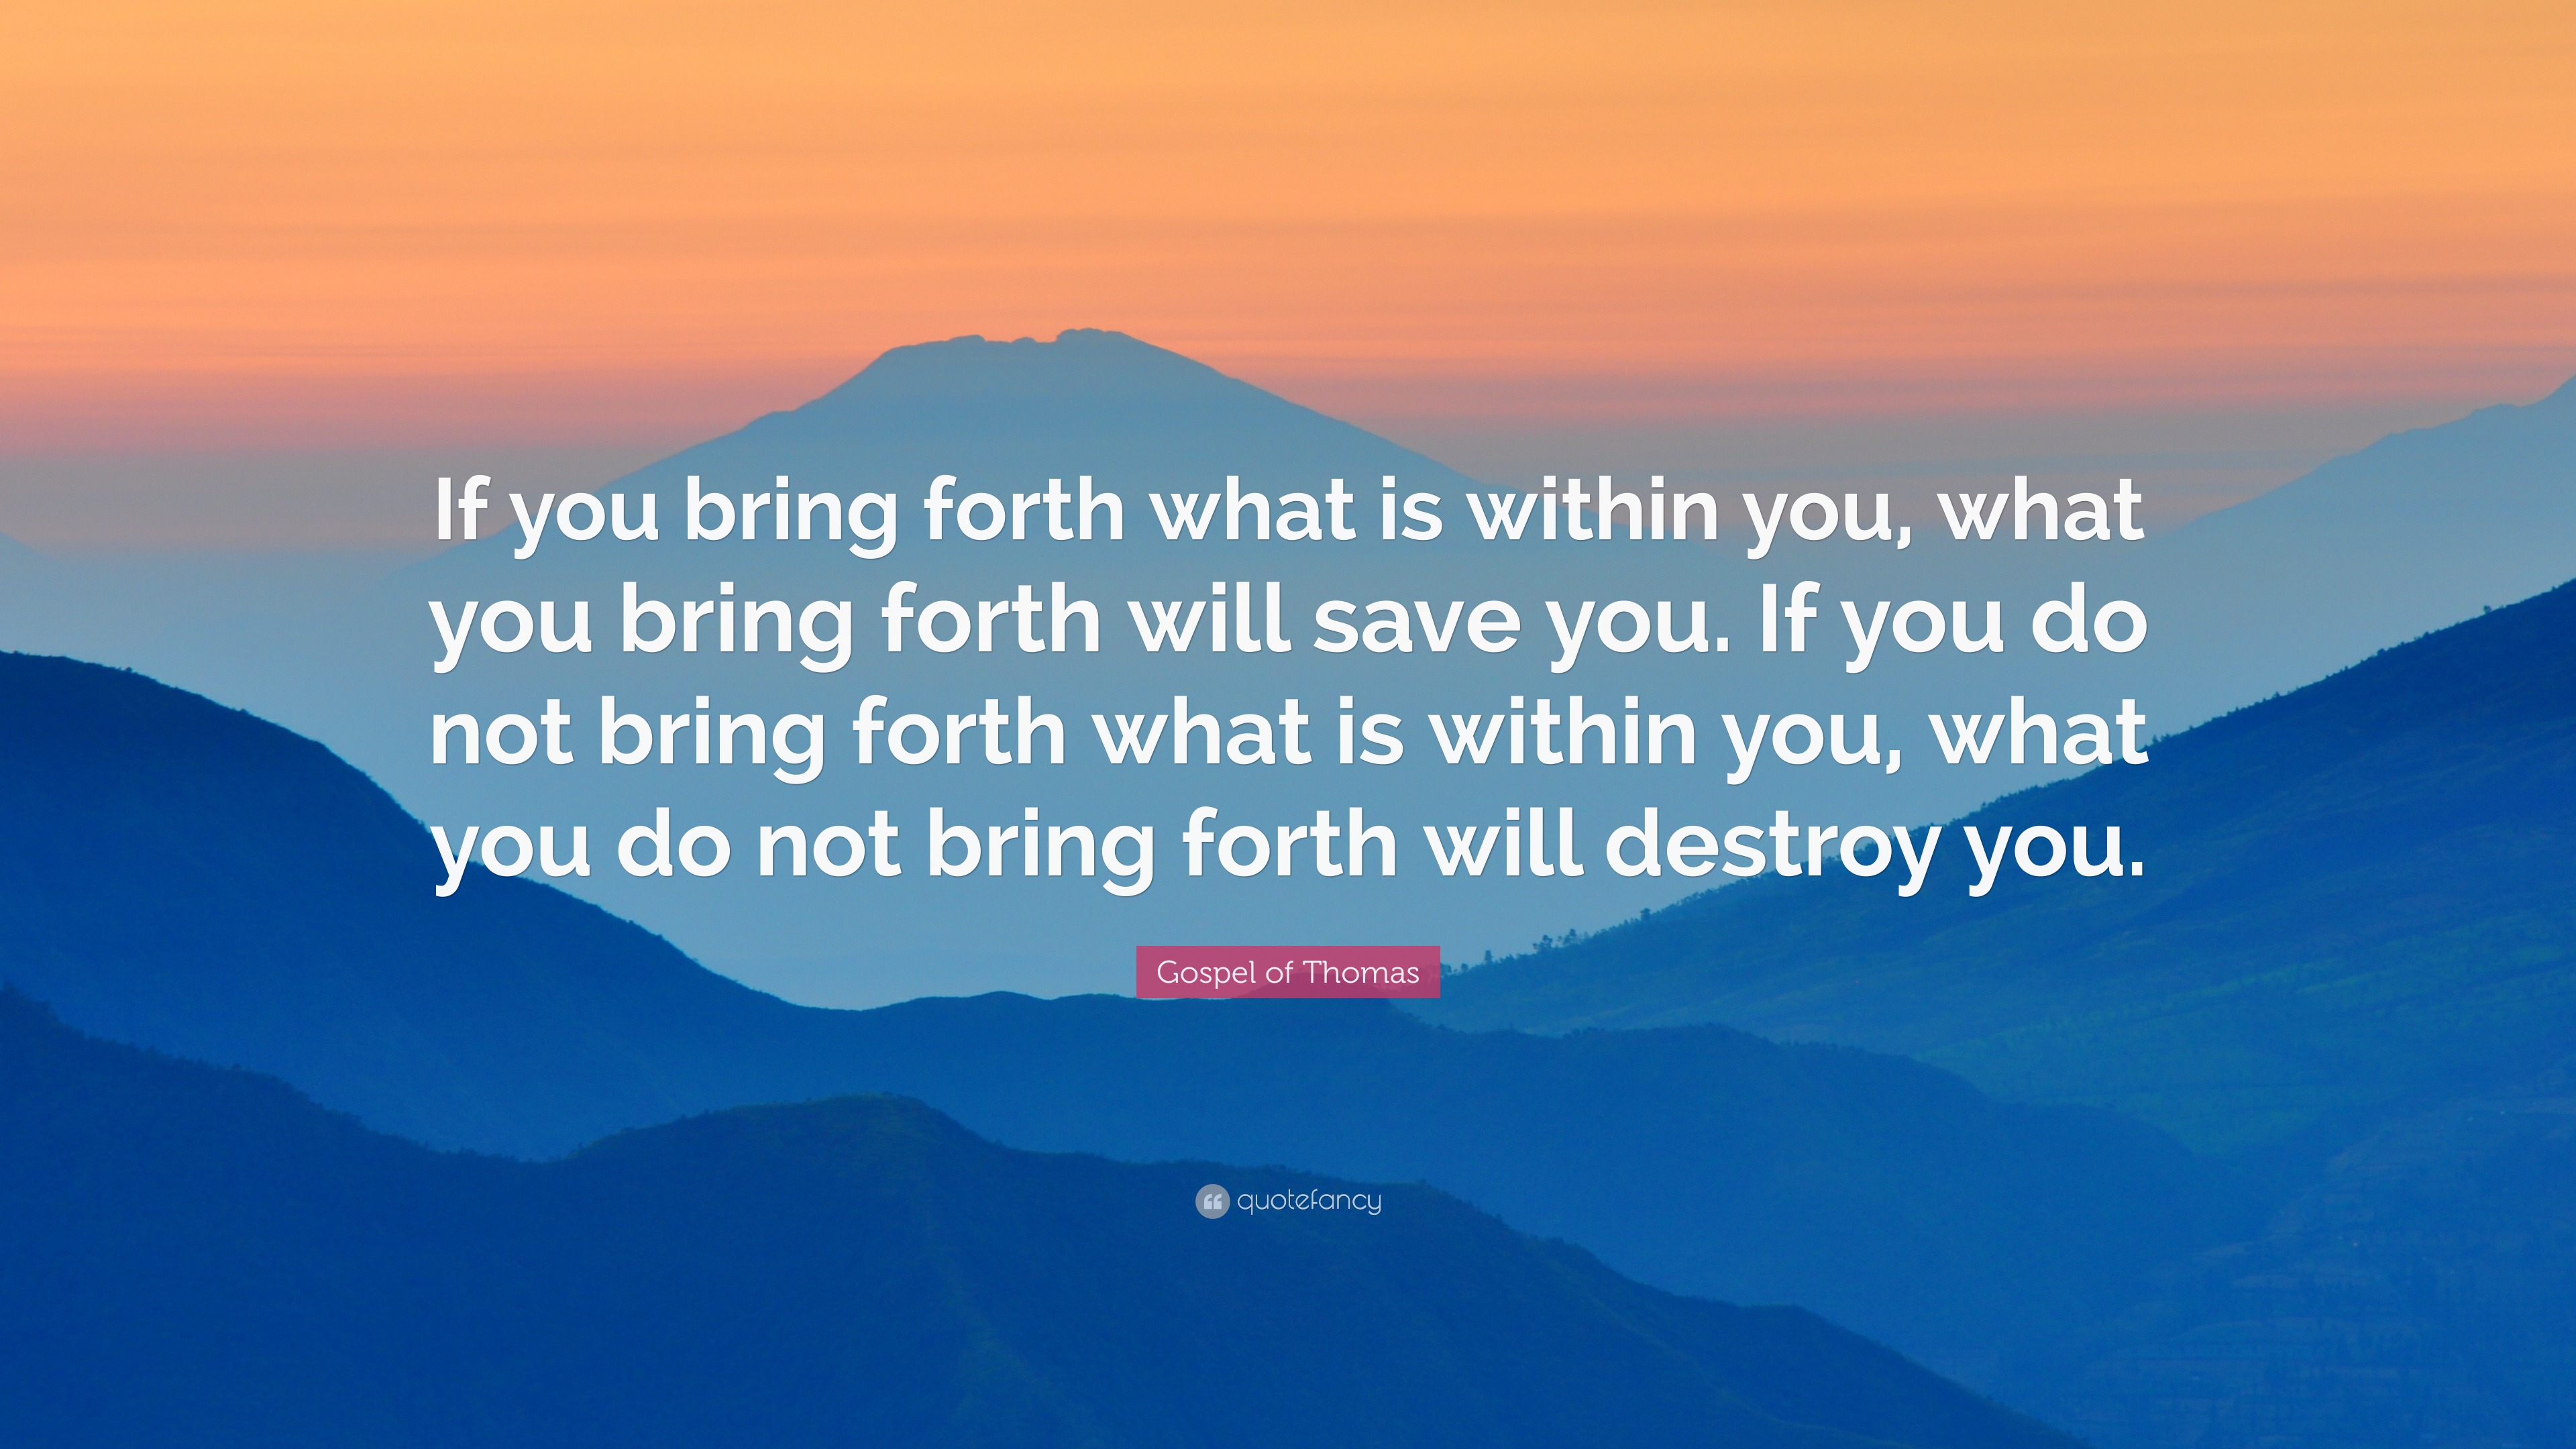 Gospel of Thomas Quote: “If you bring forth what is within you, what